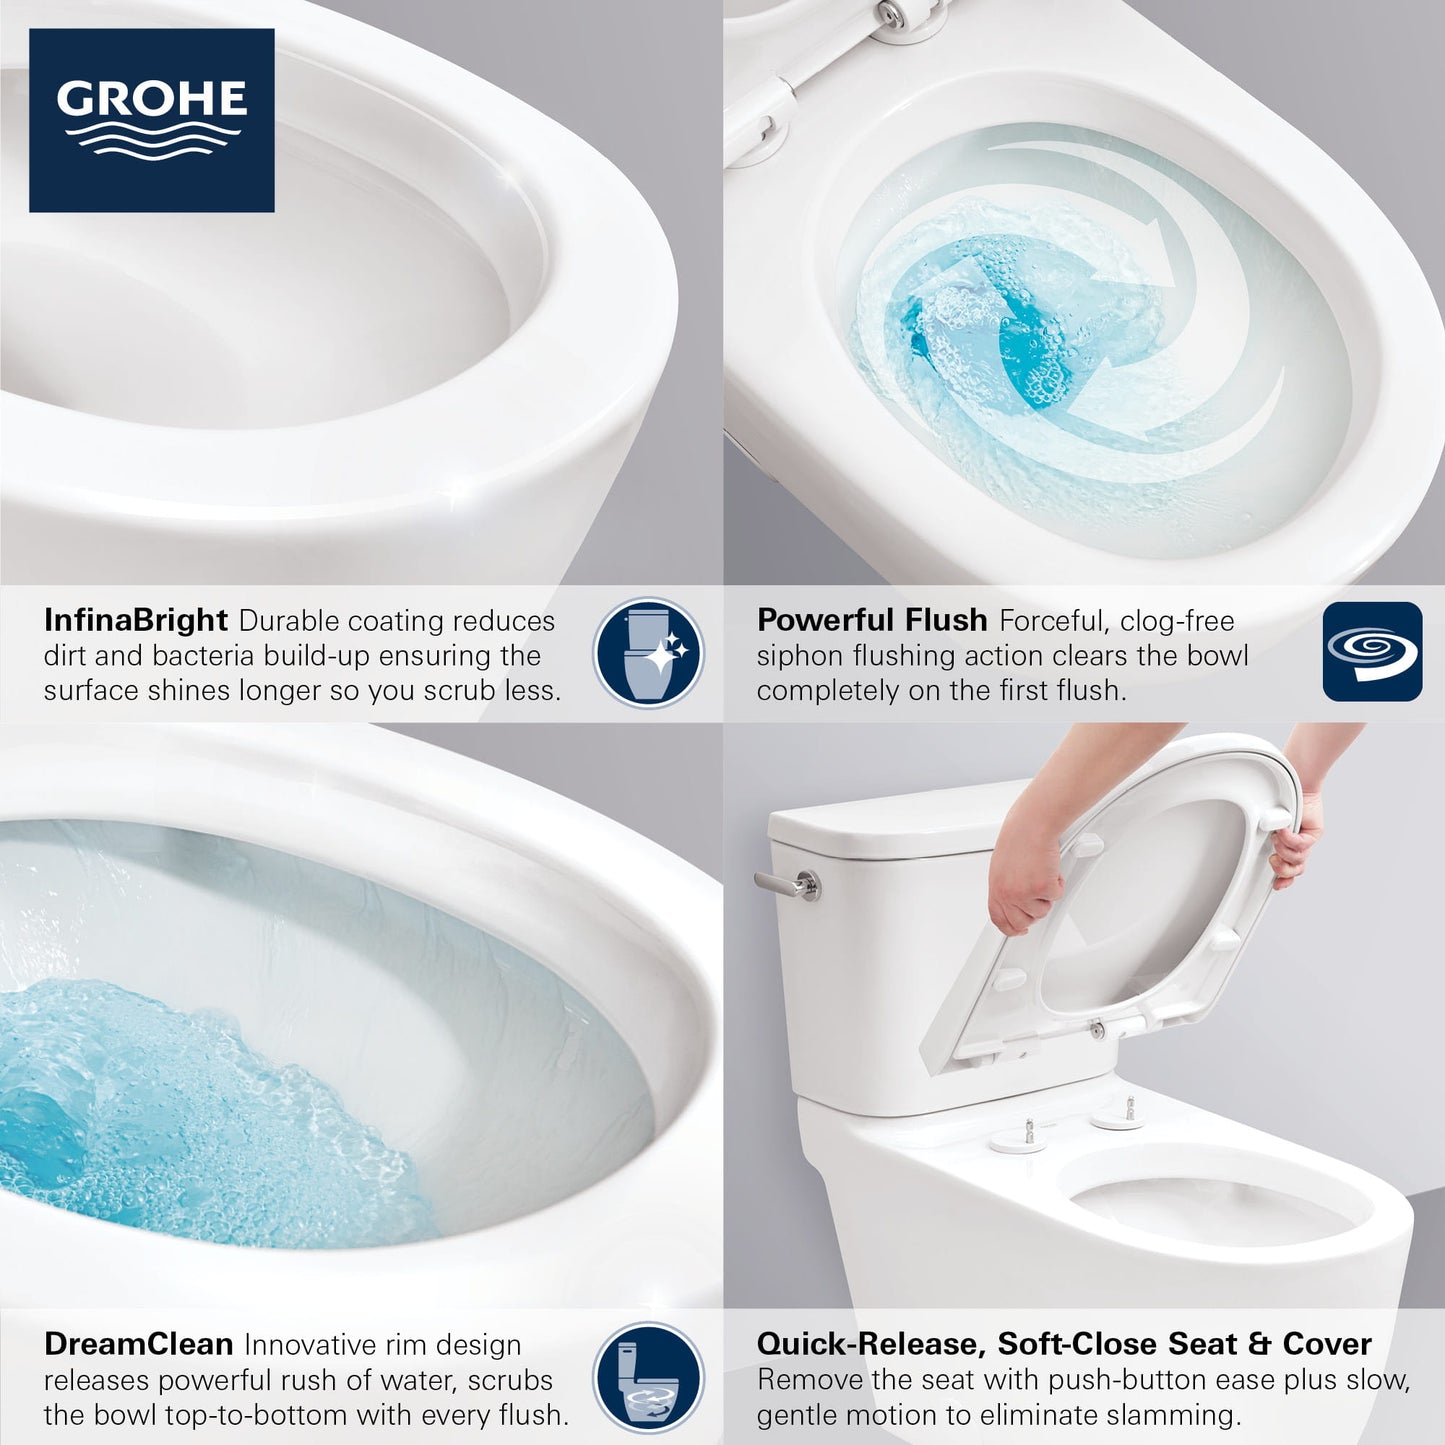 Grohe Essence Two-piece Right Height Elongated Toilet With Seat, Left-hand Trip Lever